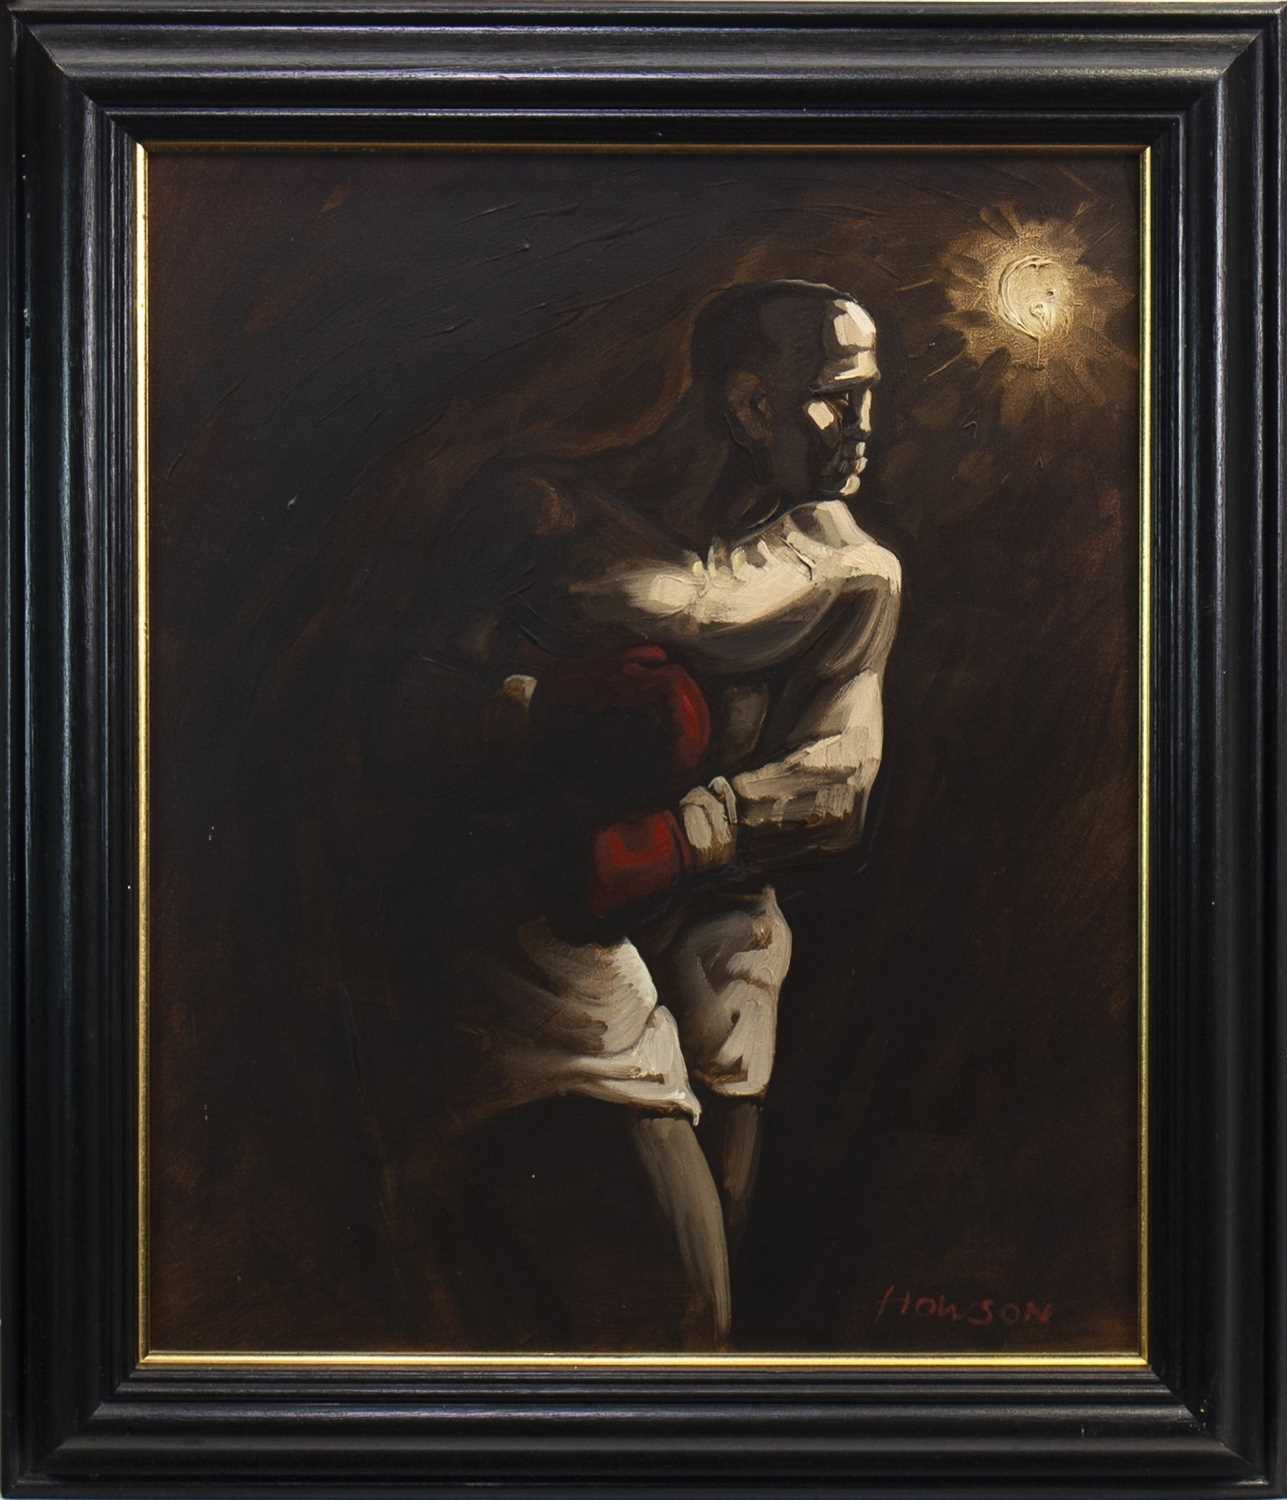 Lot 574 - THE PUGILIST, AN OIL BY PETER HOWSON